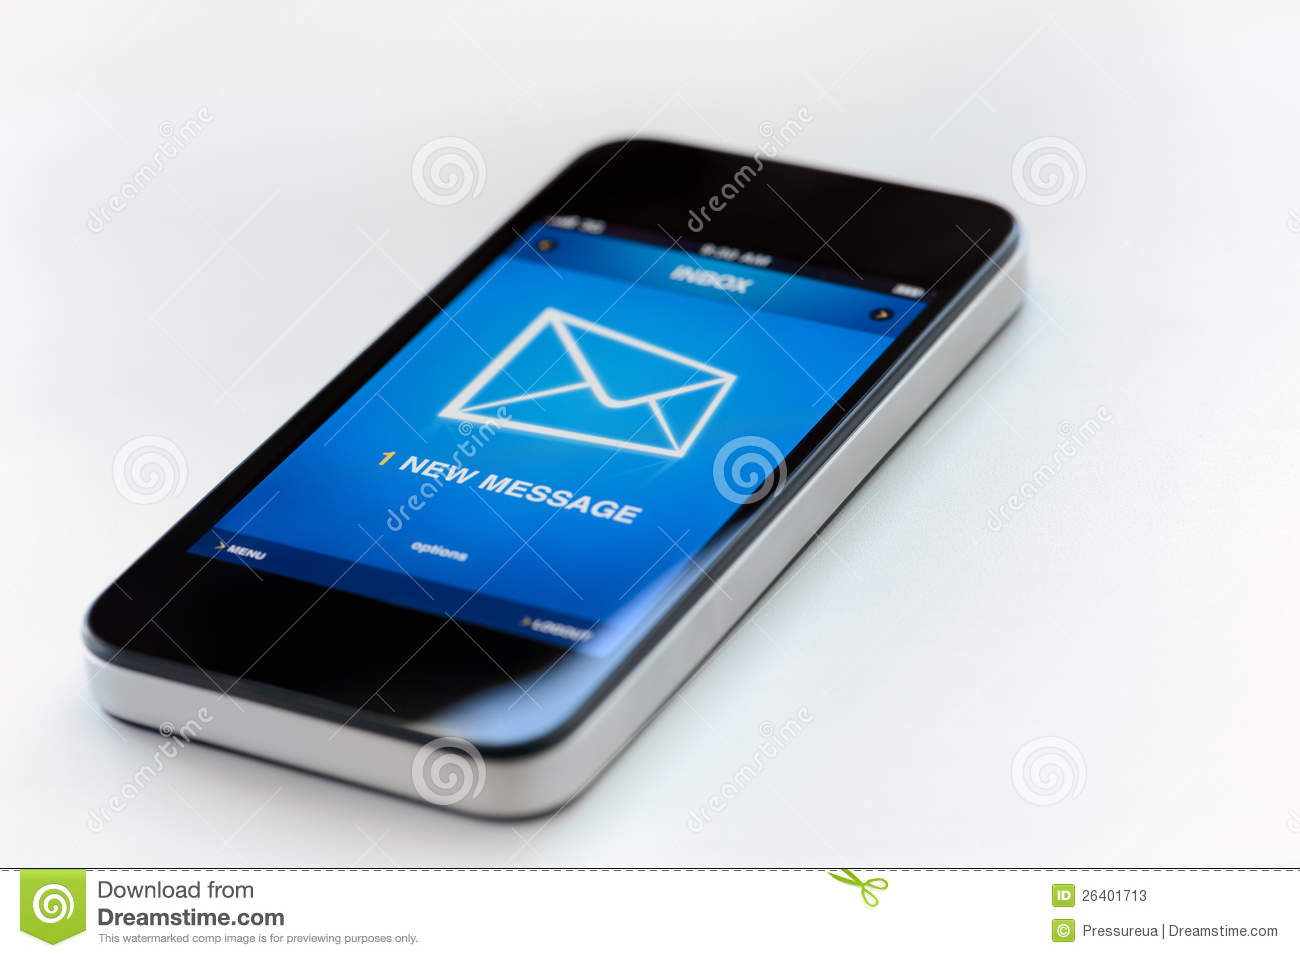 New Message On Mobile Smart Phone Stock Photos   Image  26401713